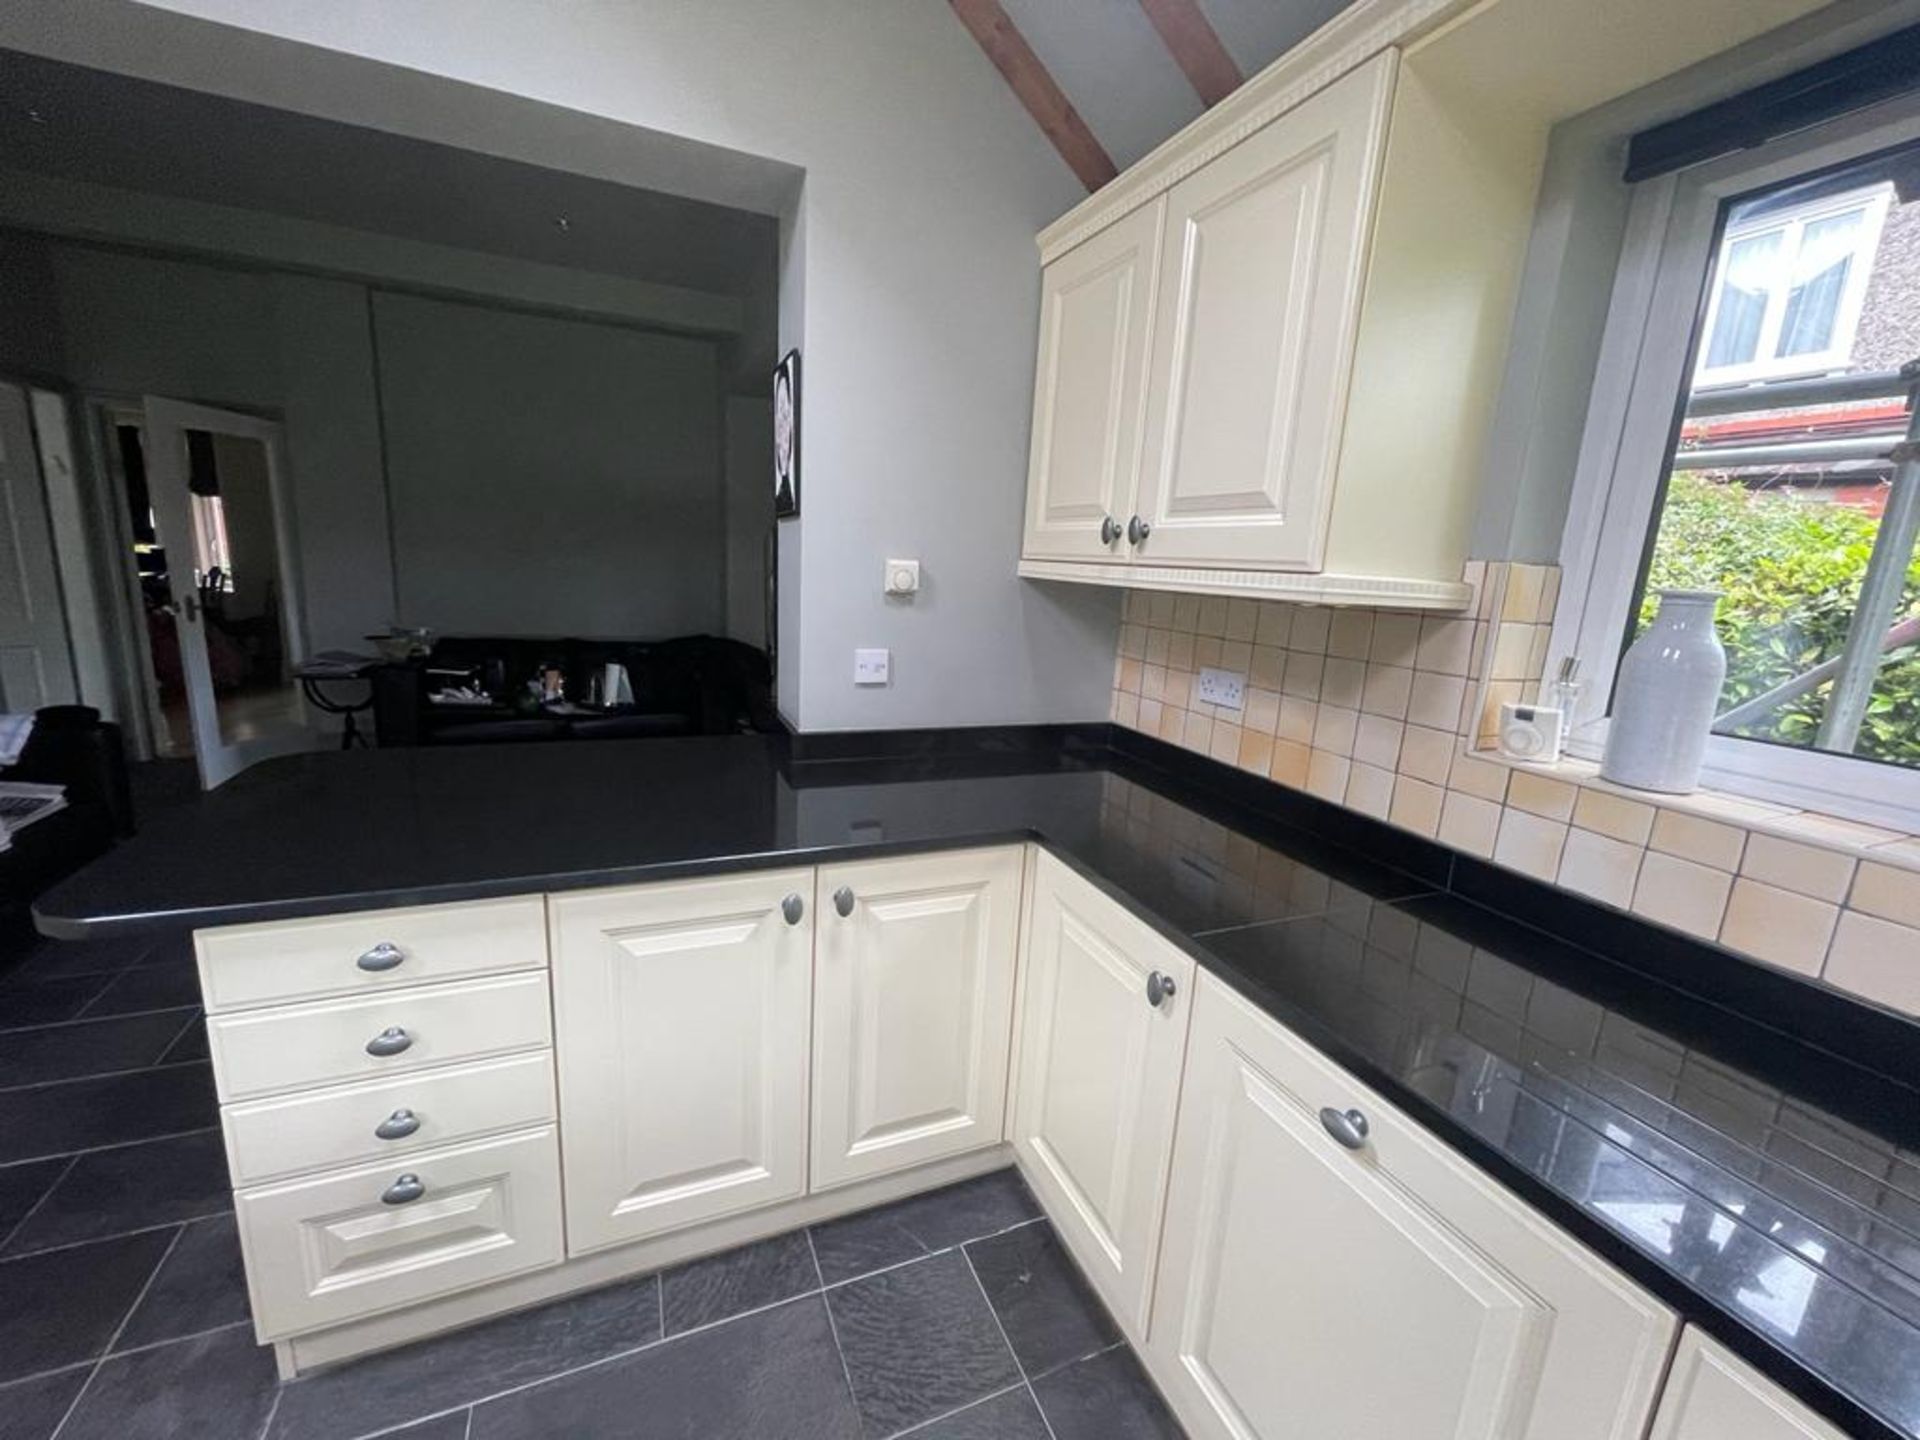 1 x Bespoke Keller Kitchen With Branded Appliances - From An Exclusive Property - No VAT On The - Image 121 of 127